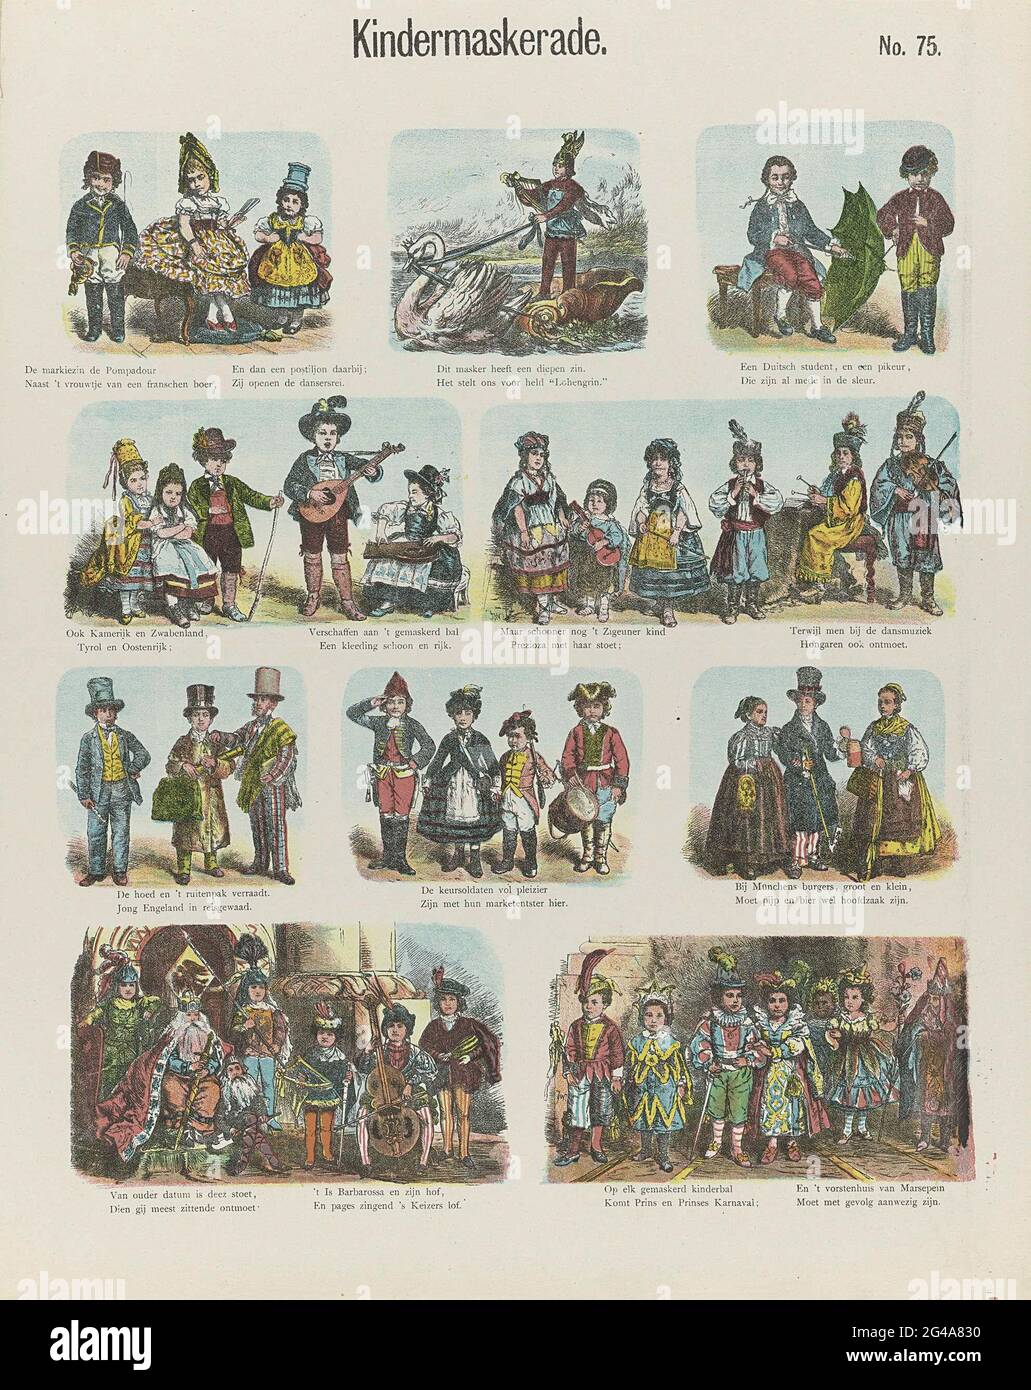 Children's mask dress; Meijer's prints. Leaf with 10 performances of  children in carnival clothing, including children such as French people  from the 18th century, in Austrian and Tyrolean costumes, such as Hungarian